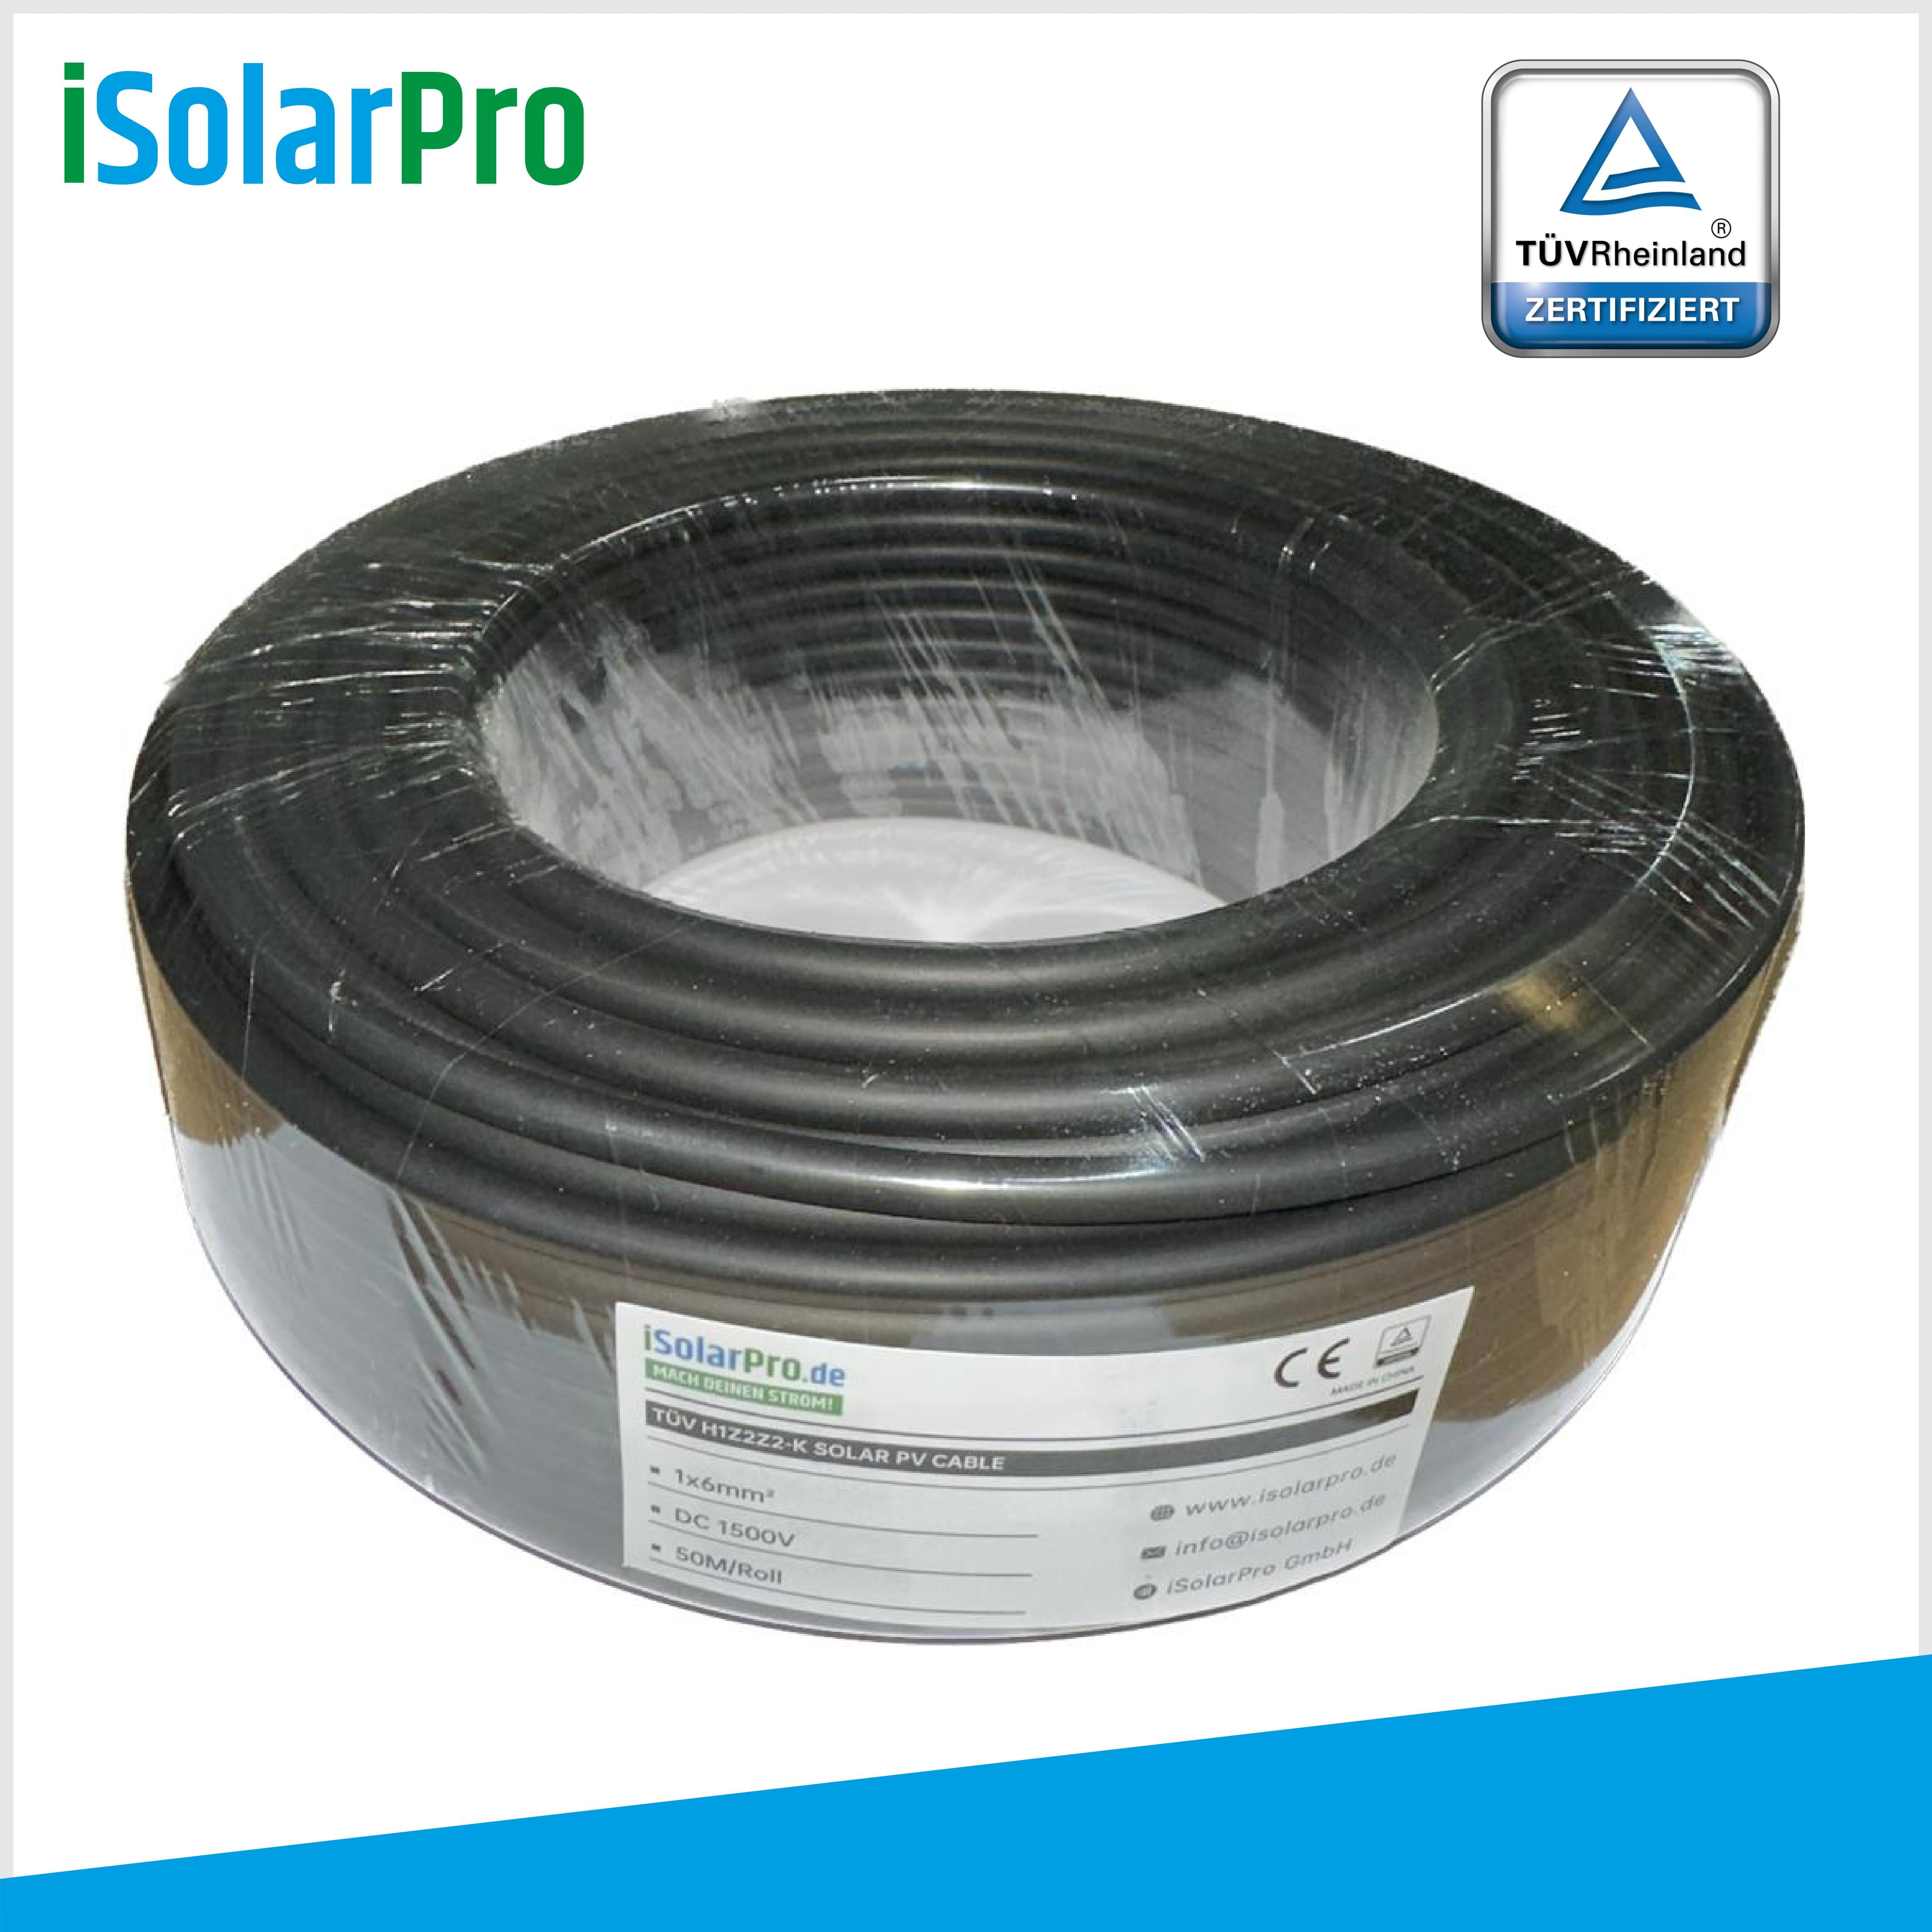 50m solar cable 6 mm² photovoltaic cable for PV systems black 